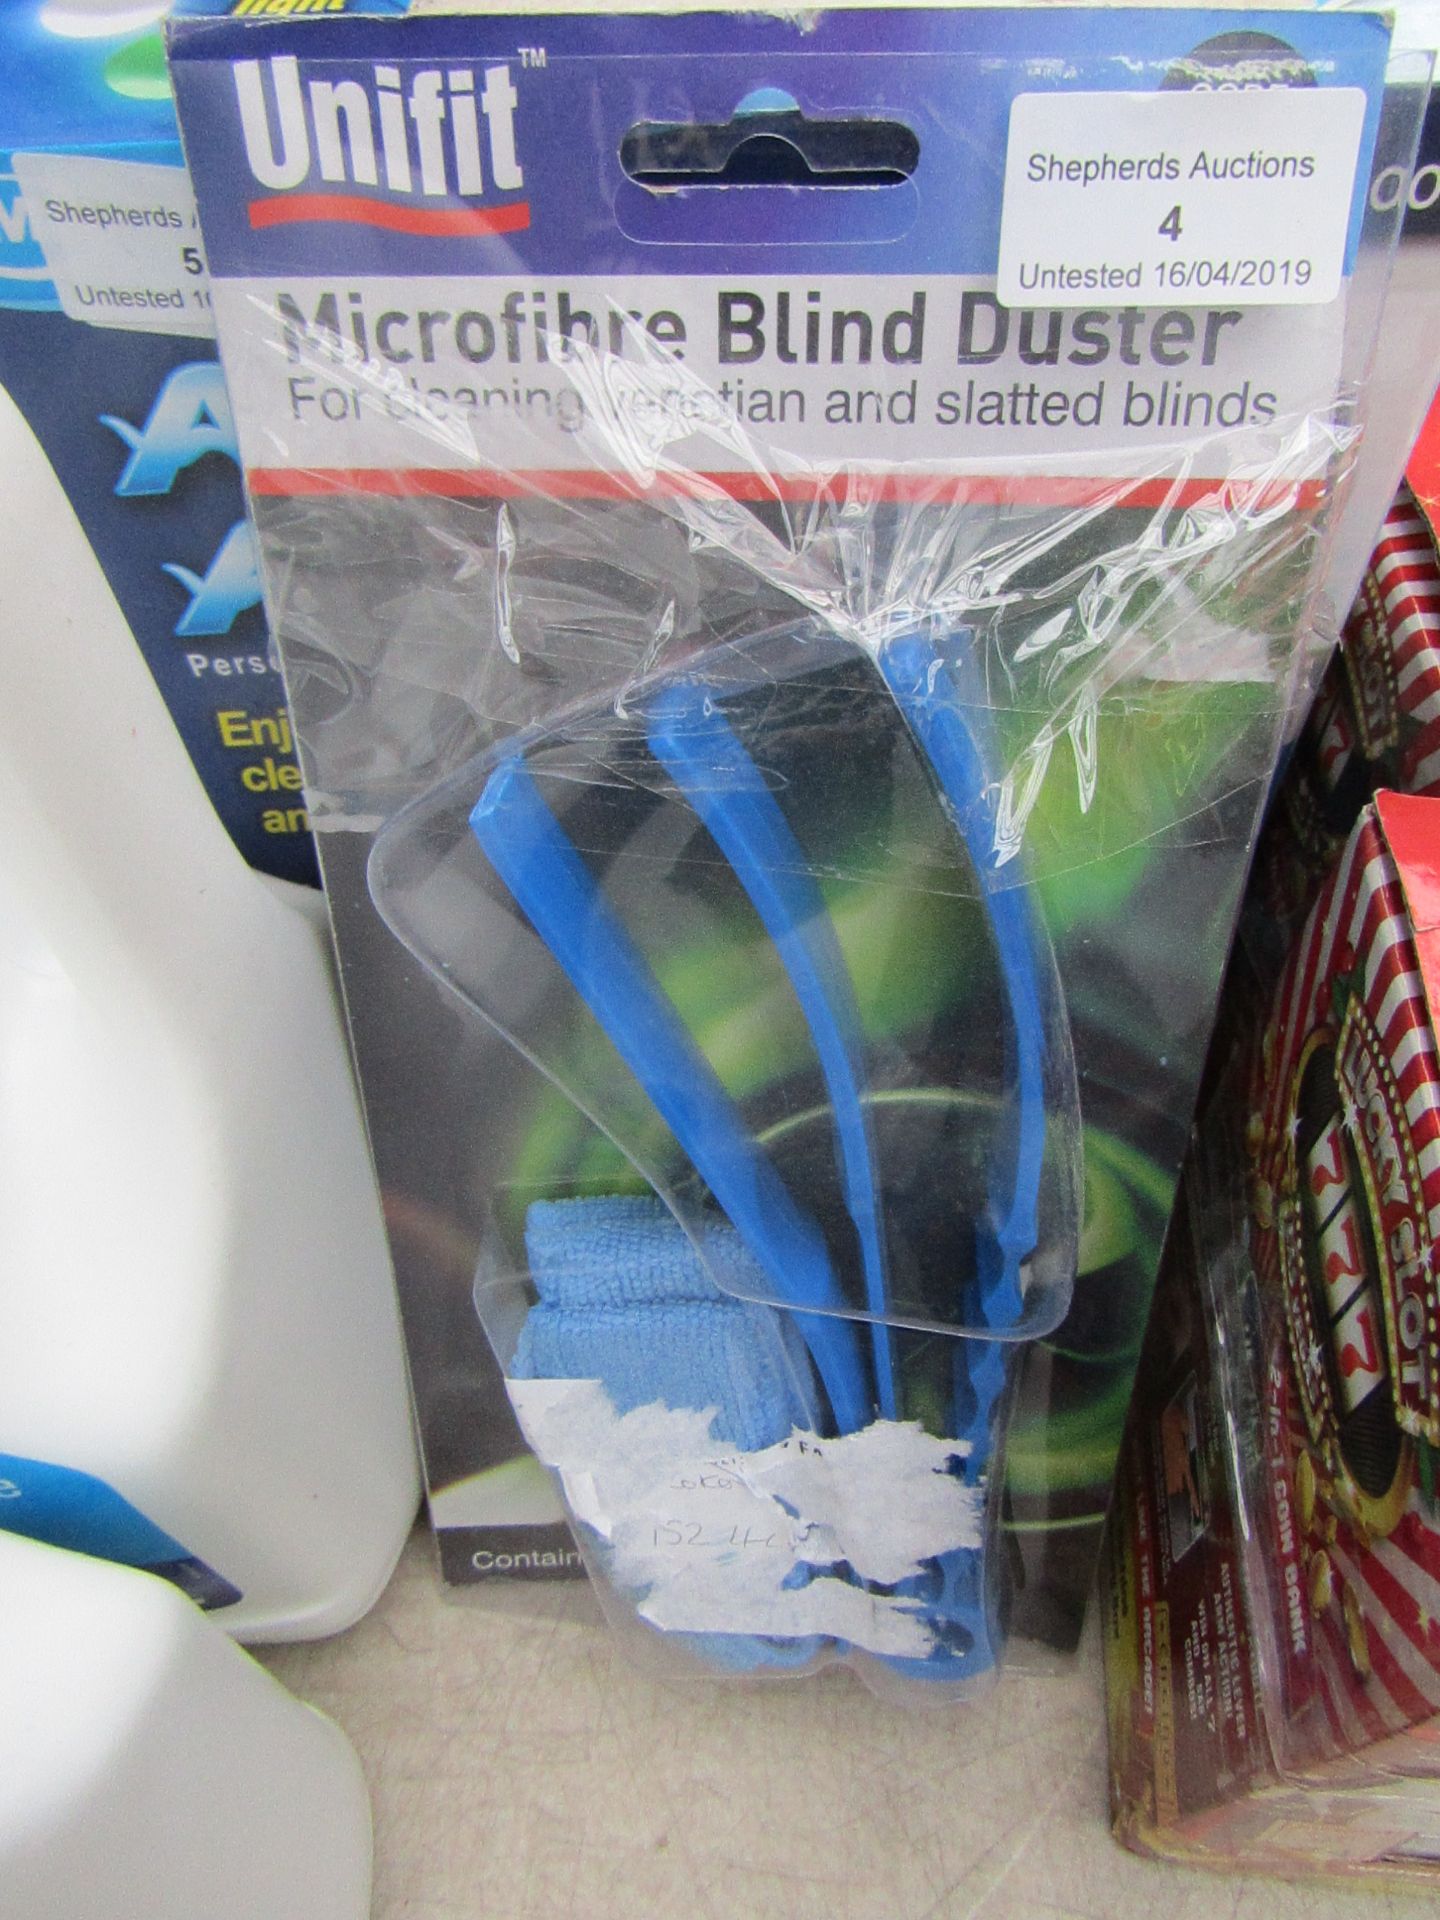 microfiber blind duster untested and in package